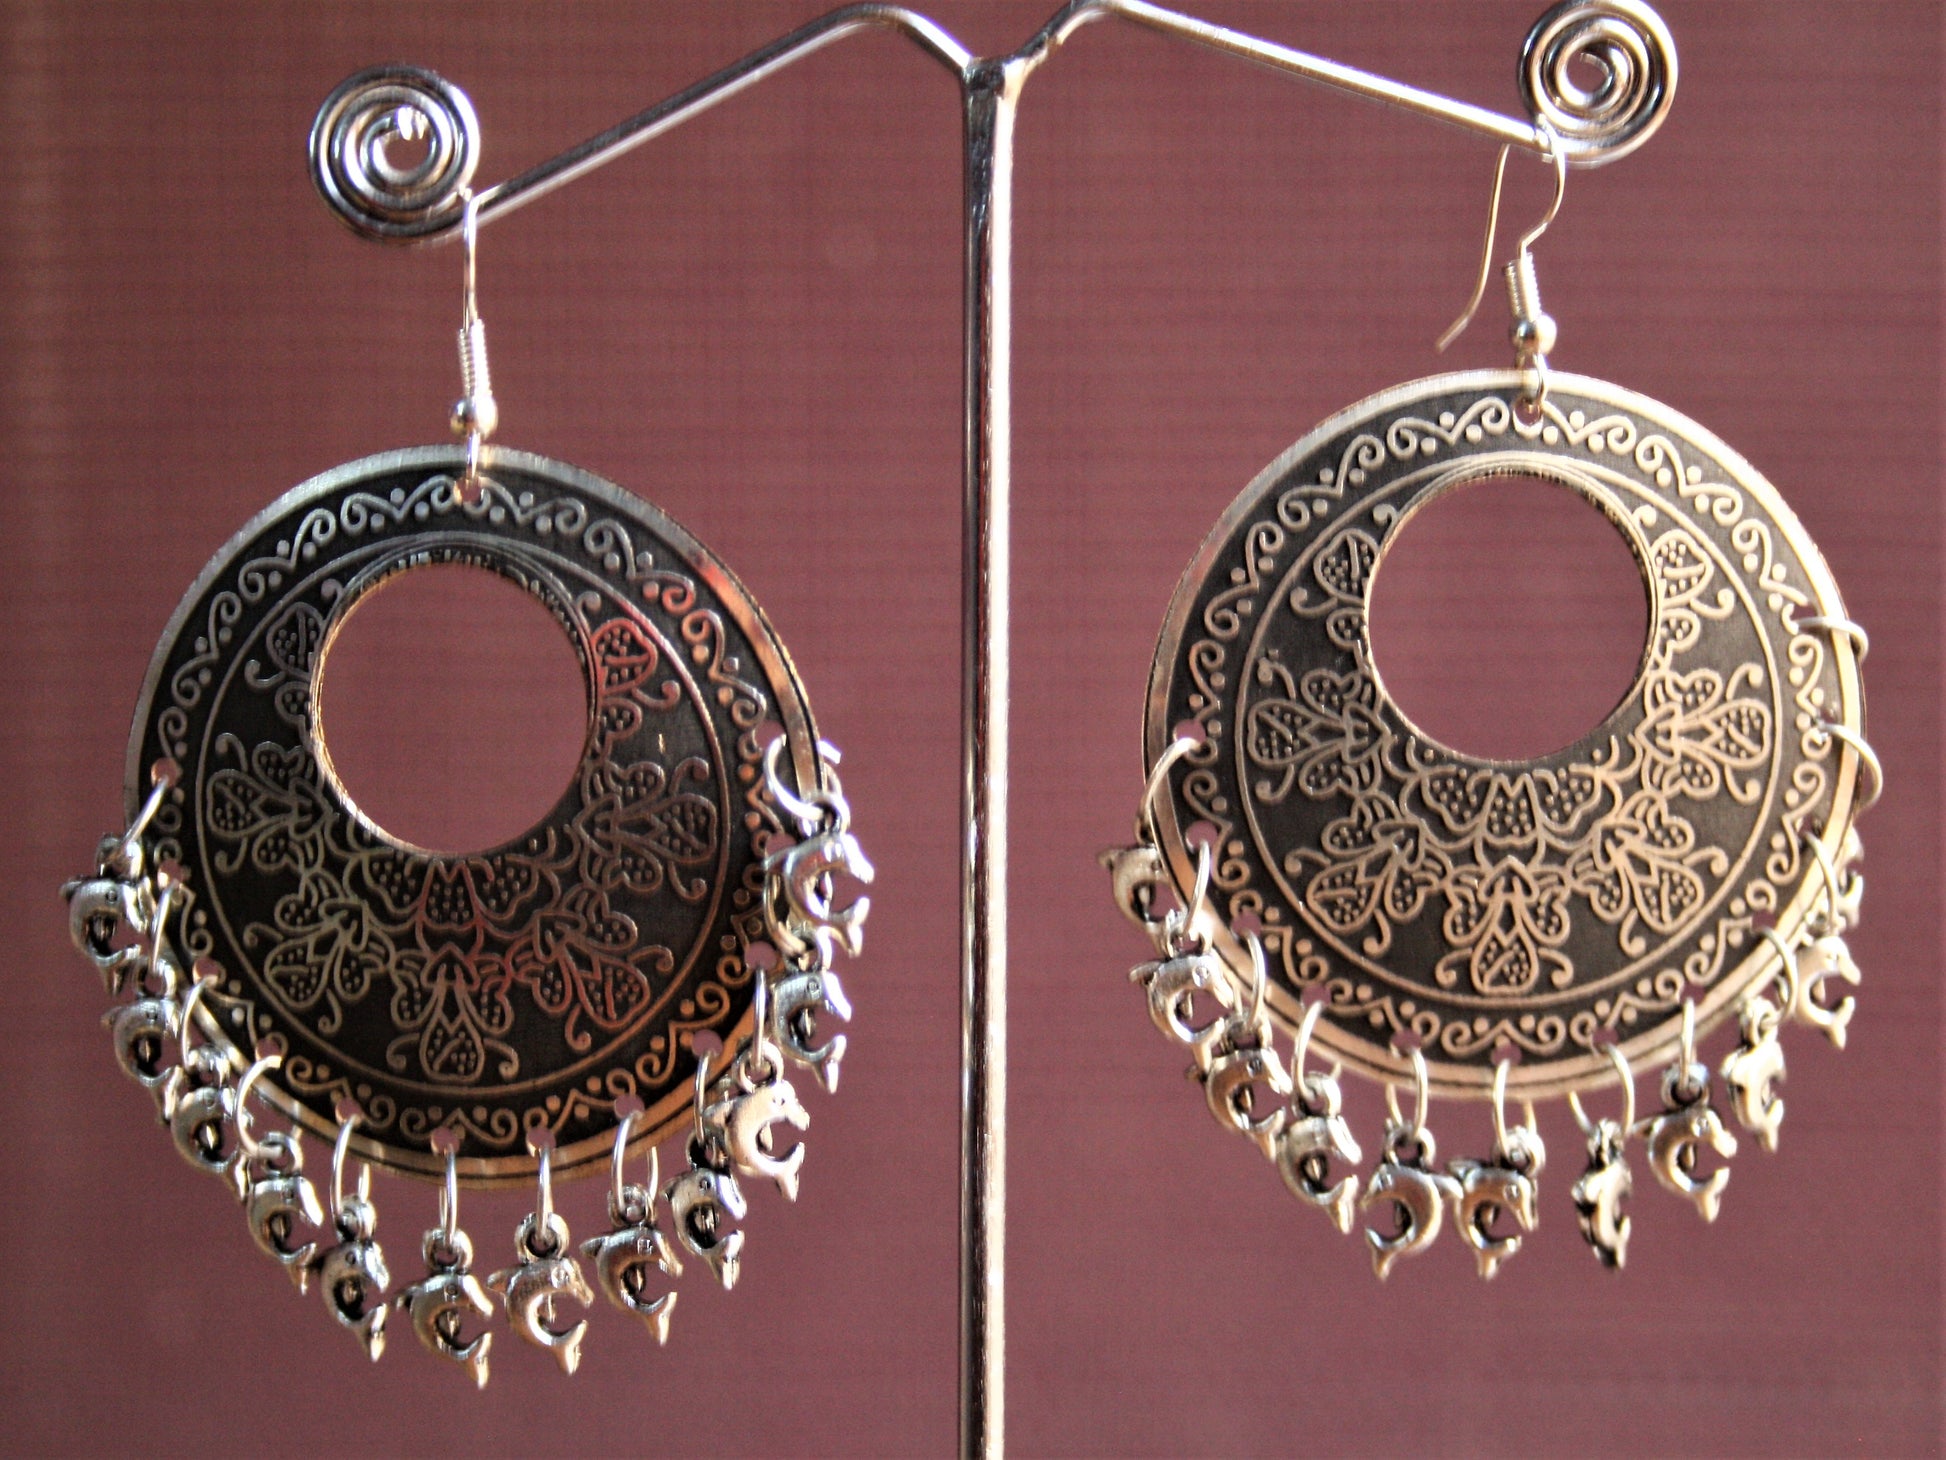 Carved Moon Cut Danglers with Dolphin Beads - GlitterGleam